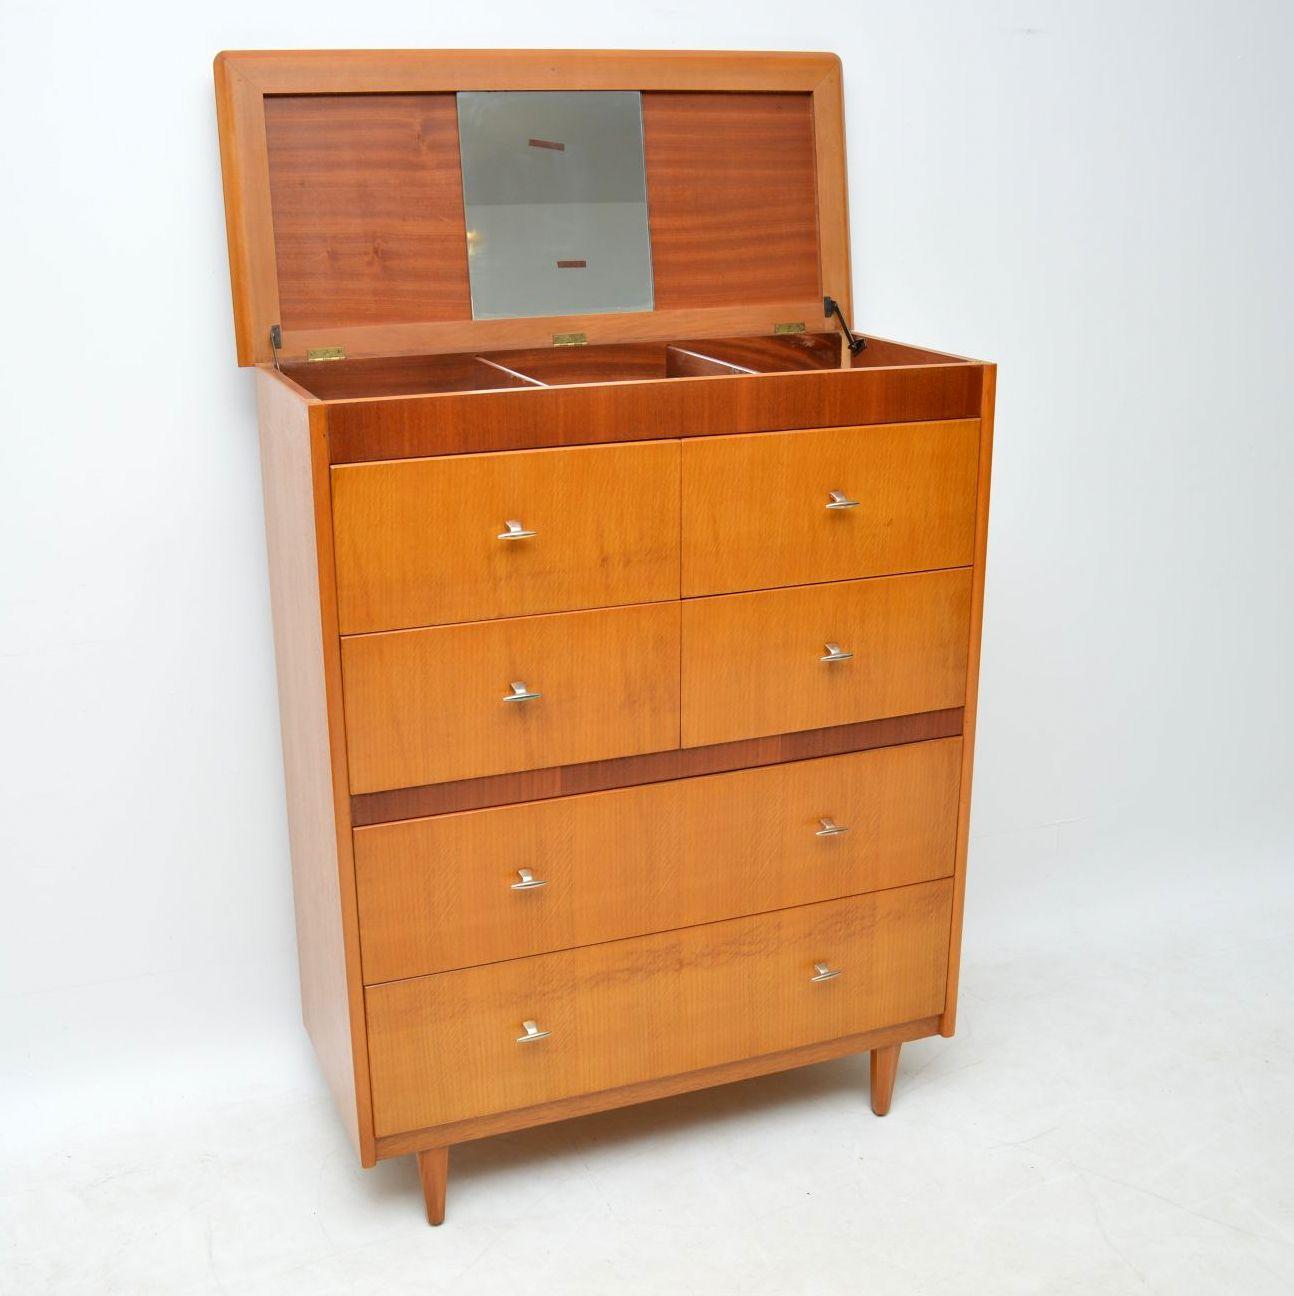 A large and very stylish vintage chest of drawers in oak and walnut, this dates from the 1950s. It’s a very useful piece, with lots of storage space. A great feature of this, is that the top flips up to reveal a mirror and further compartments for